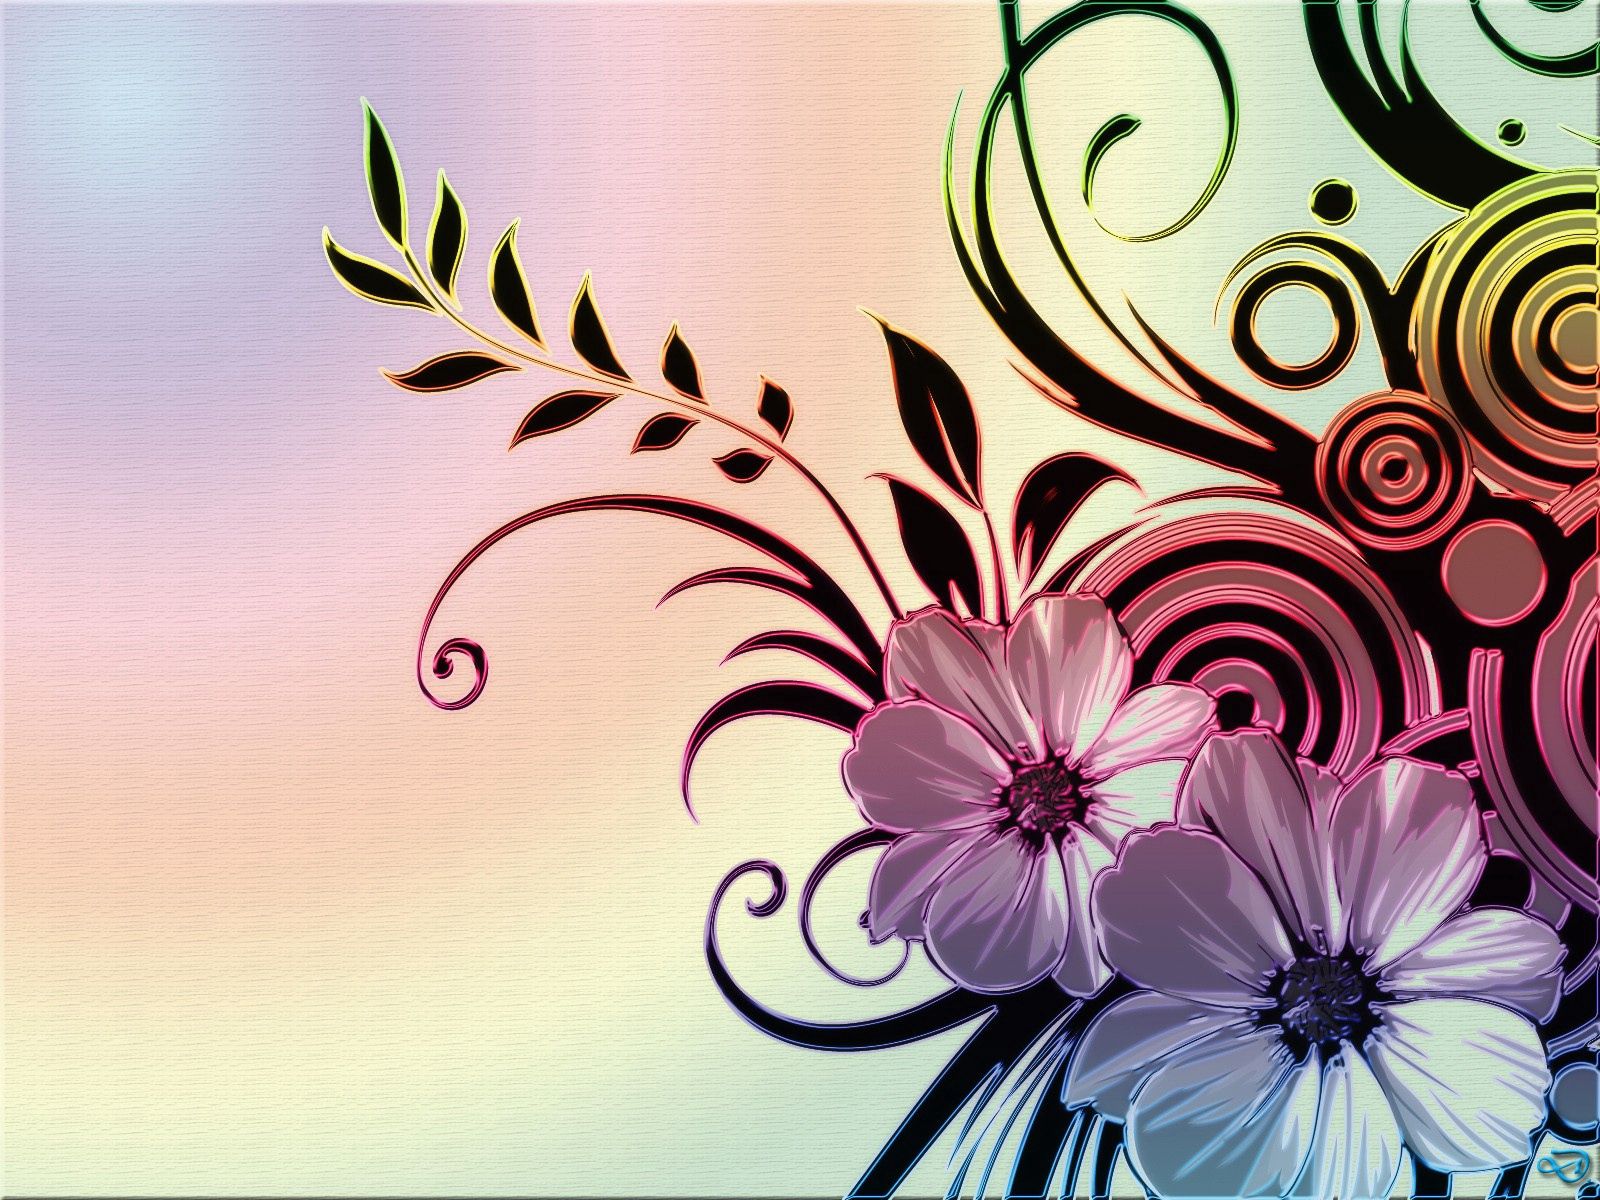 flowers, wavy, light coloured, picture, patterns, abstract, light, drawing